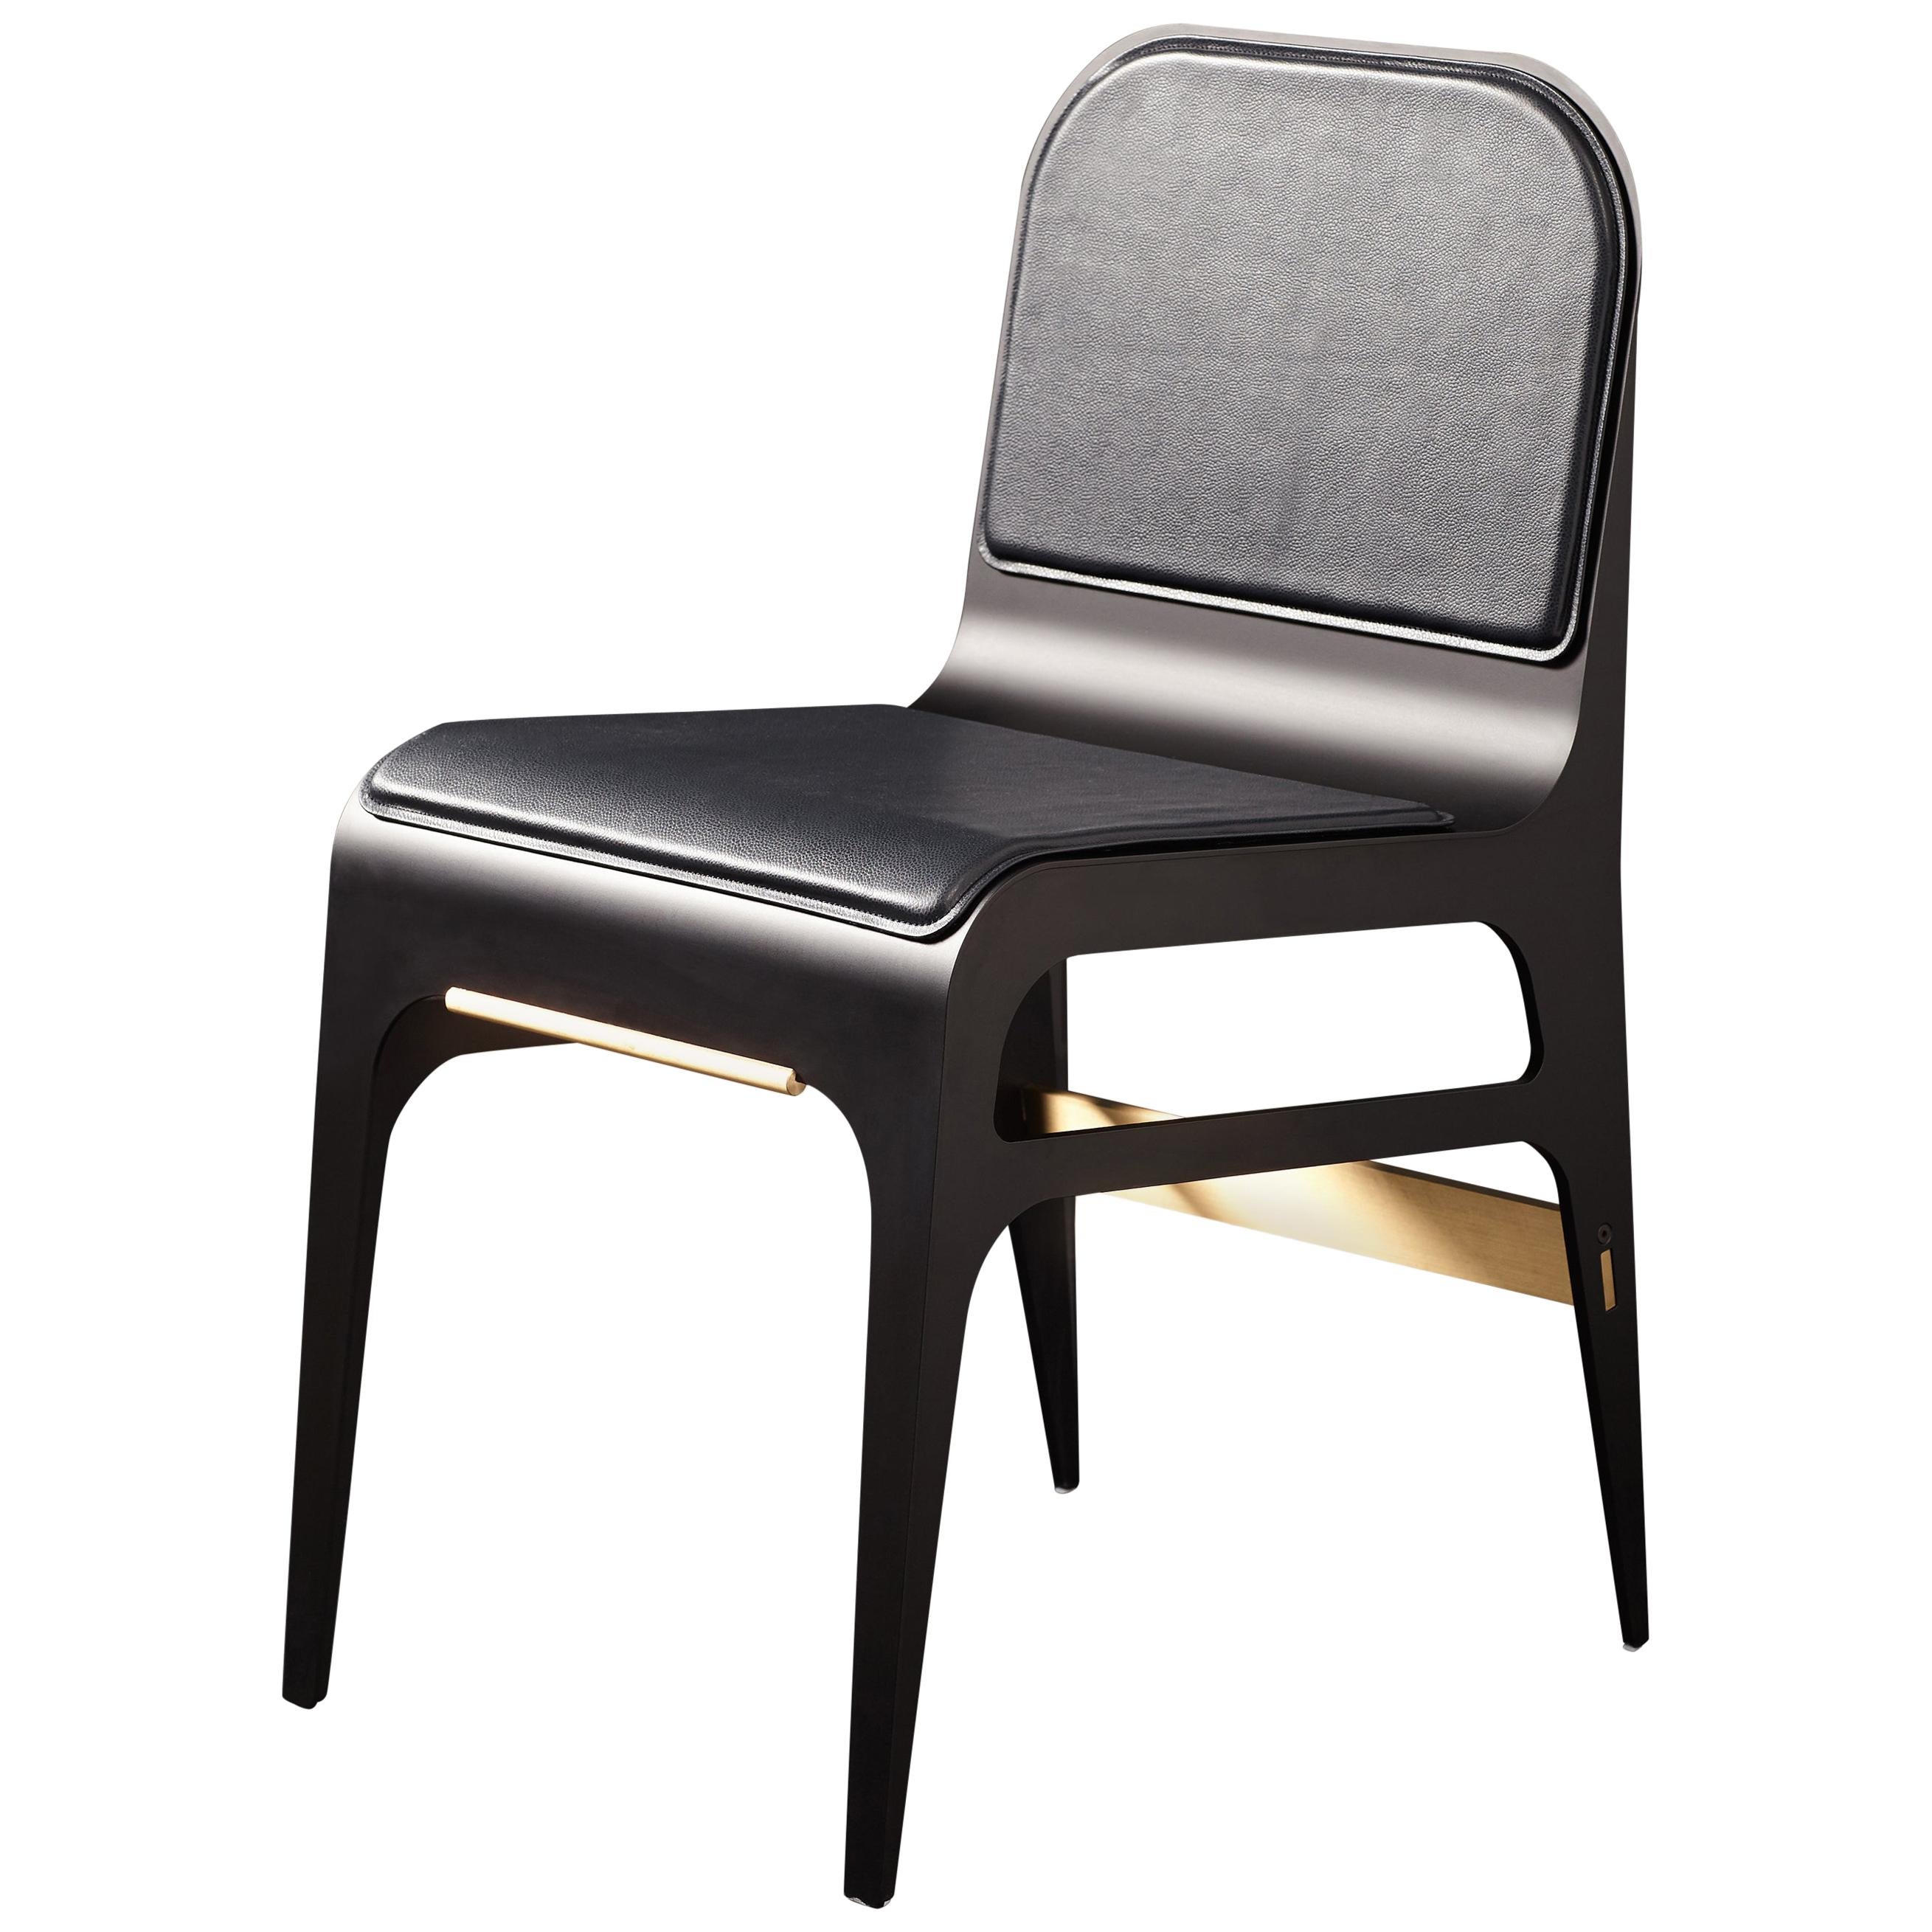 Blue (Navy Blue) Bardot Dining Chair with Leather Seat and Satin Brass Hardware by Gabriel Scott